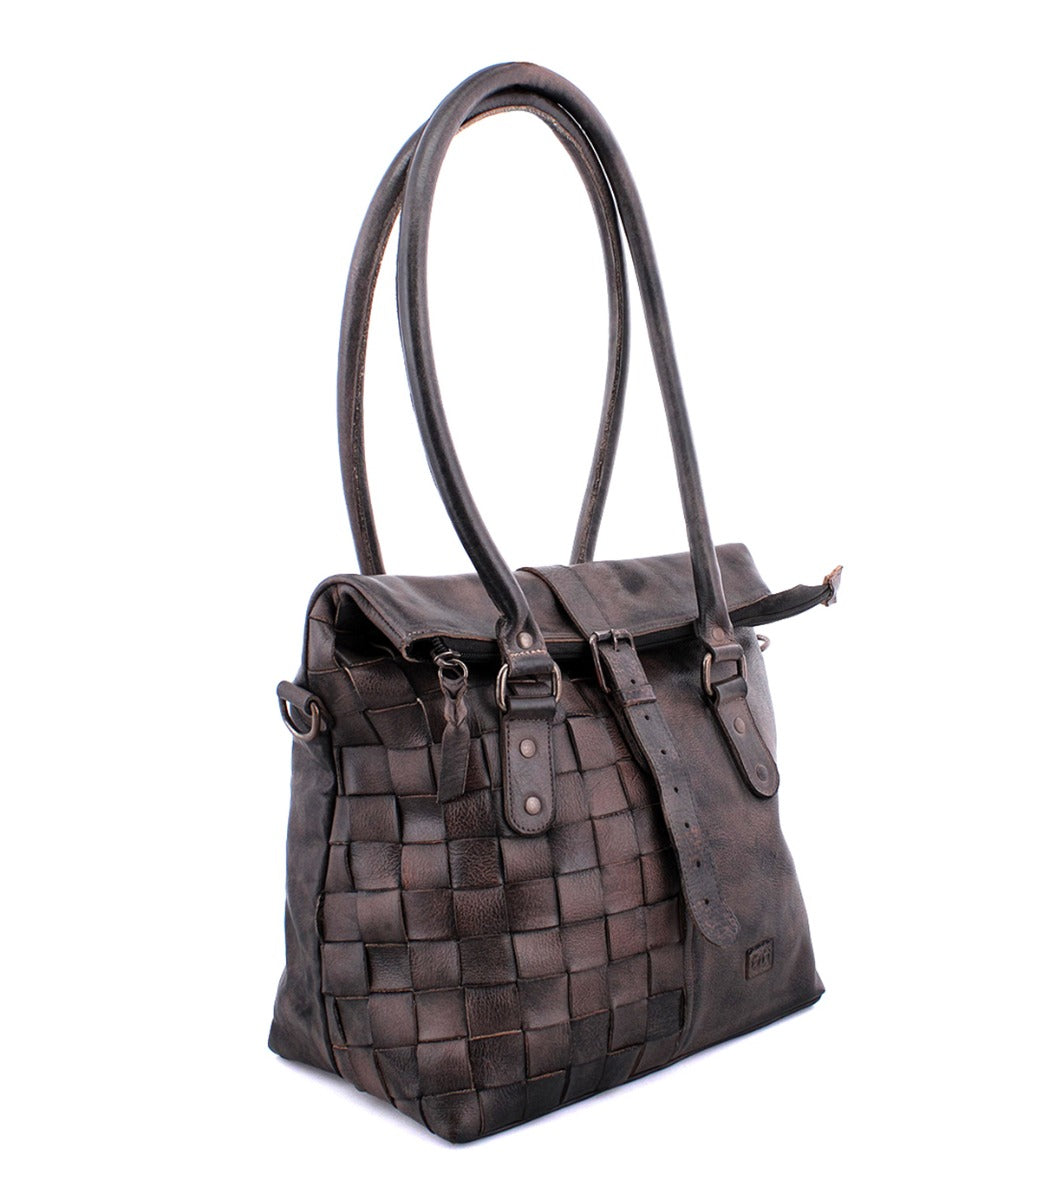 A brown leather Rachel handbag with woven handles from Bed Stu.